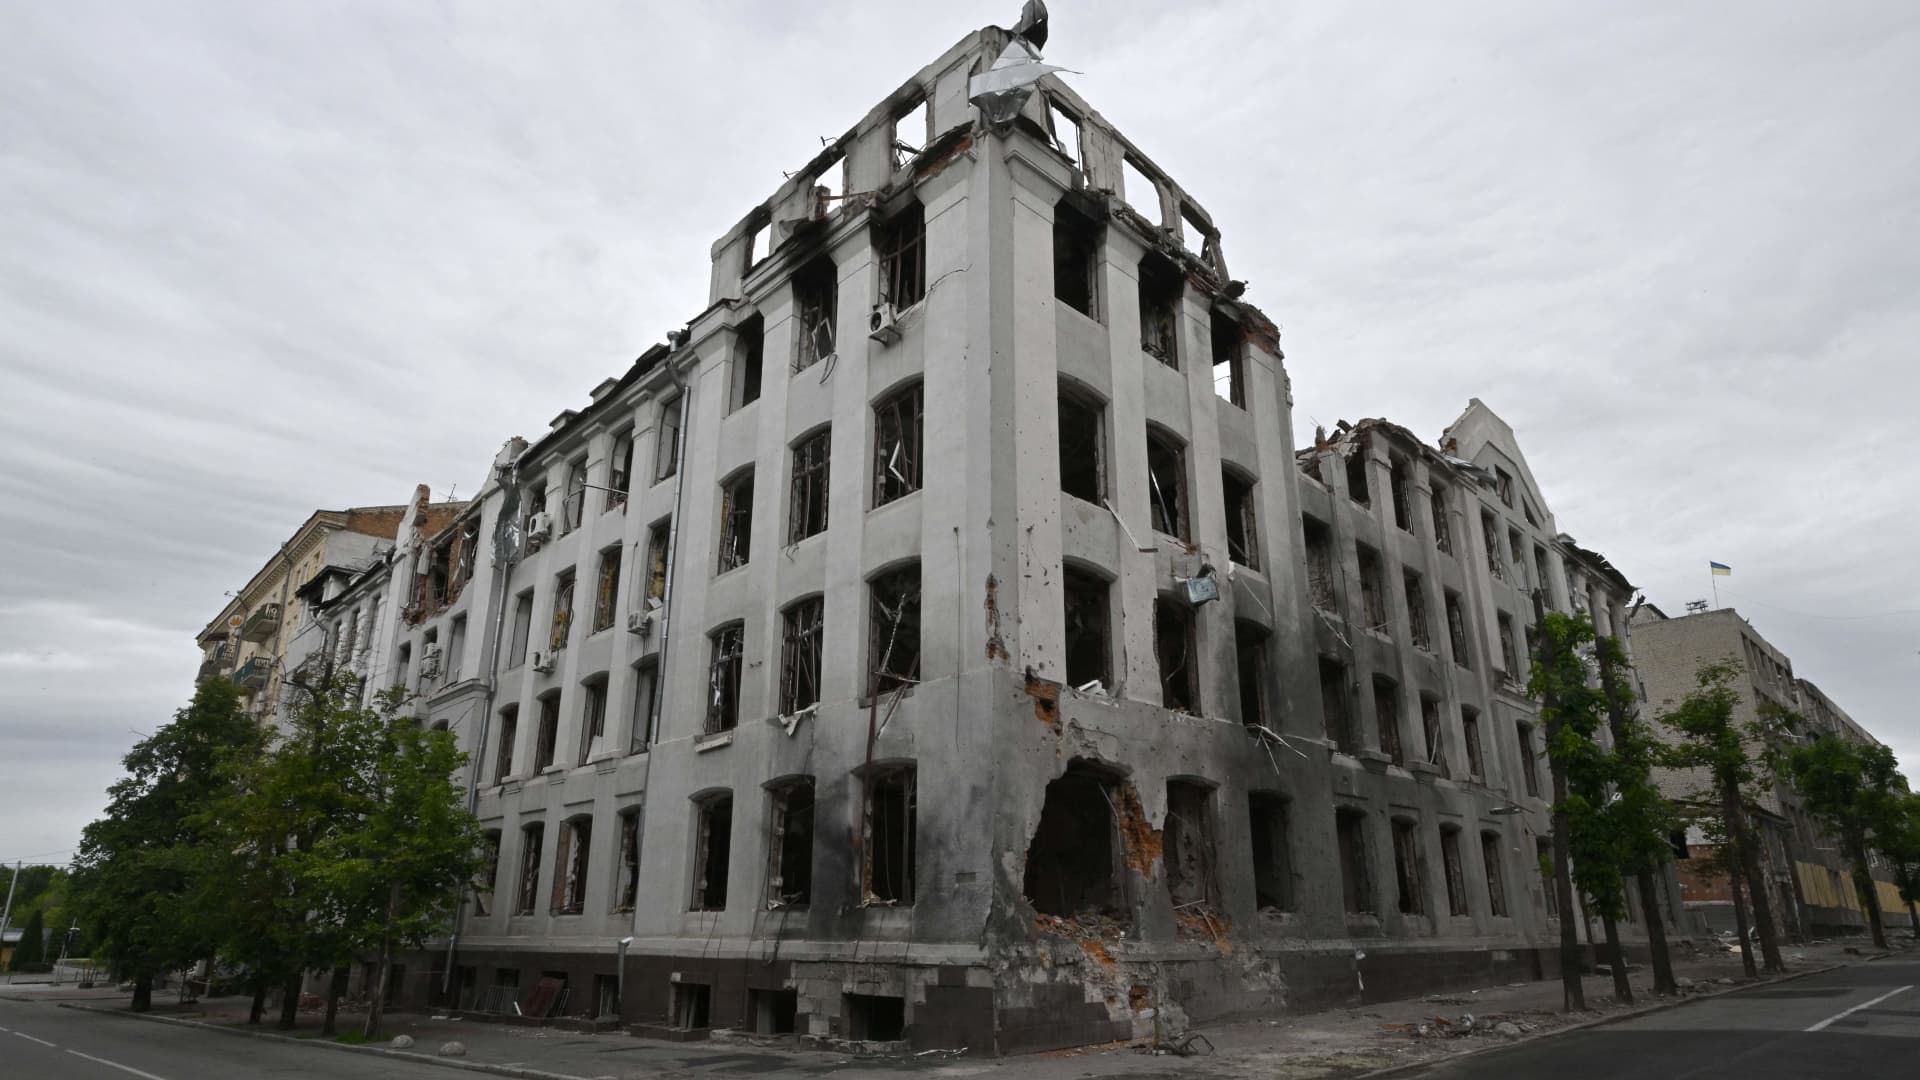 Shells and missiles have been falling on cities since the start of the war in Ukraine, damaging historic buildings.